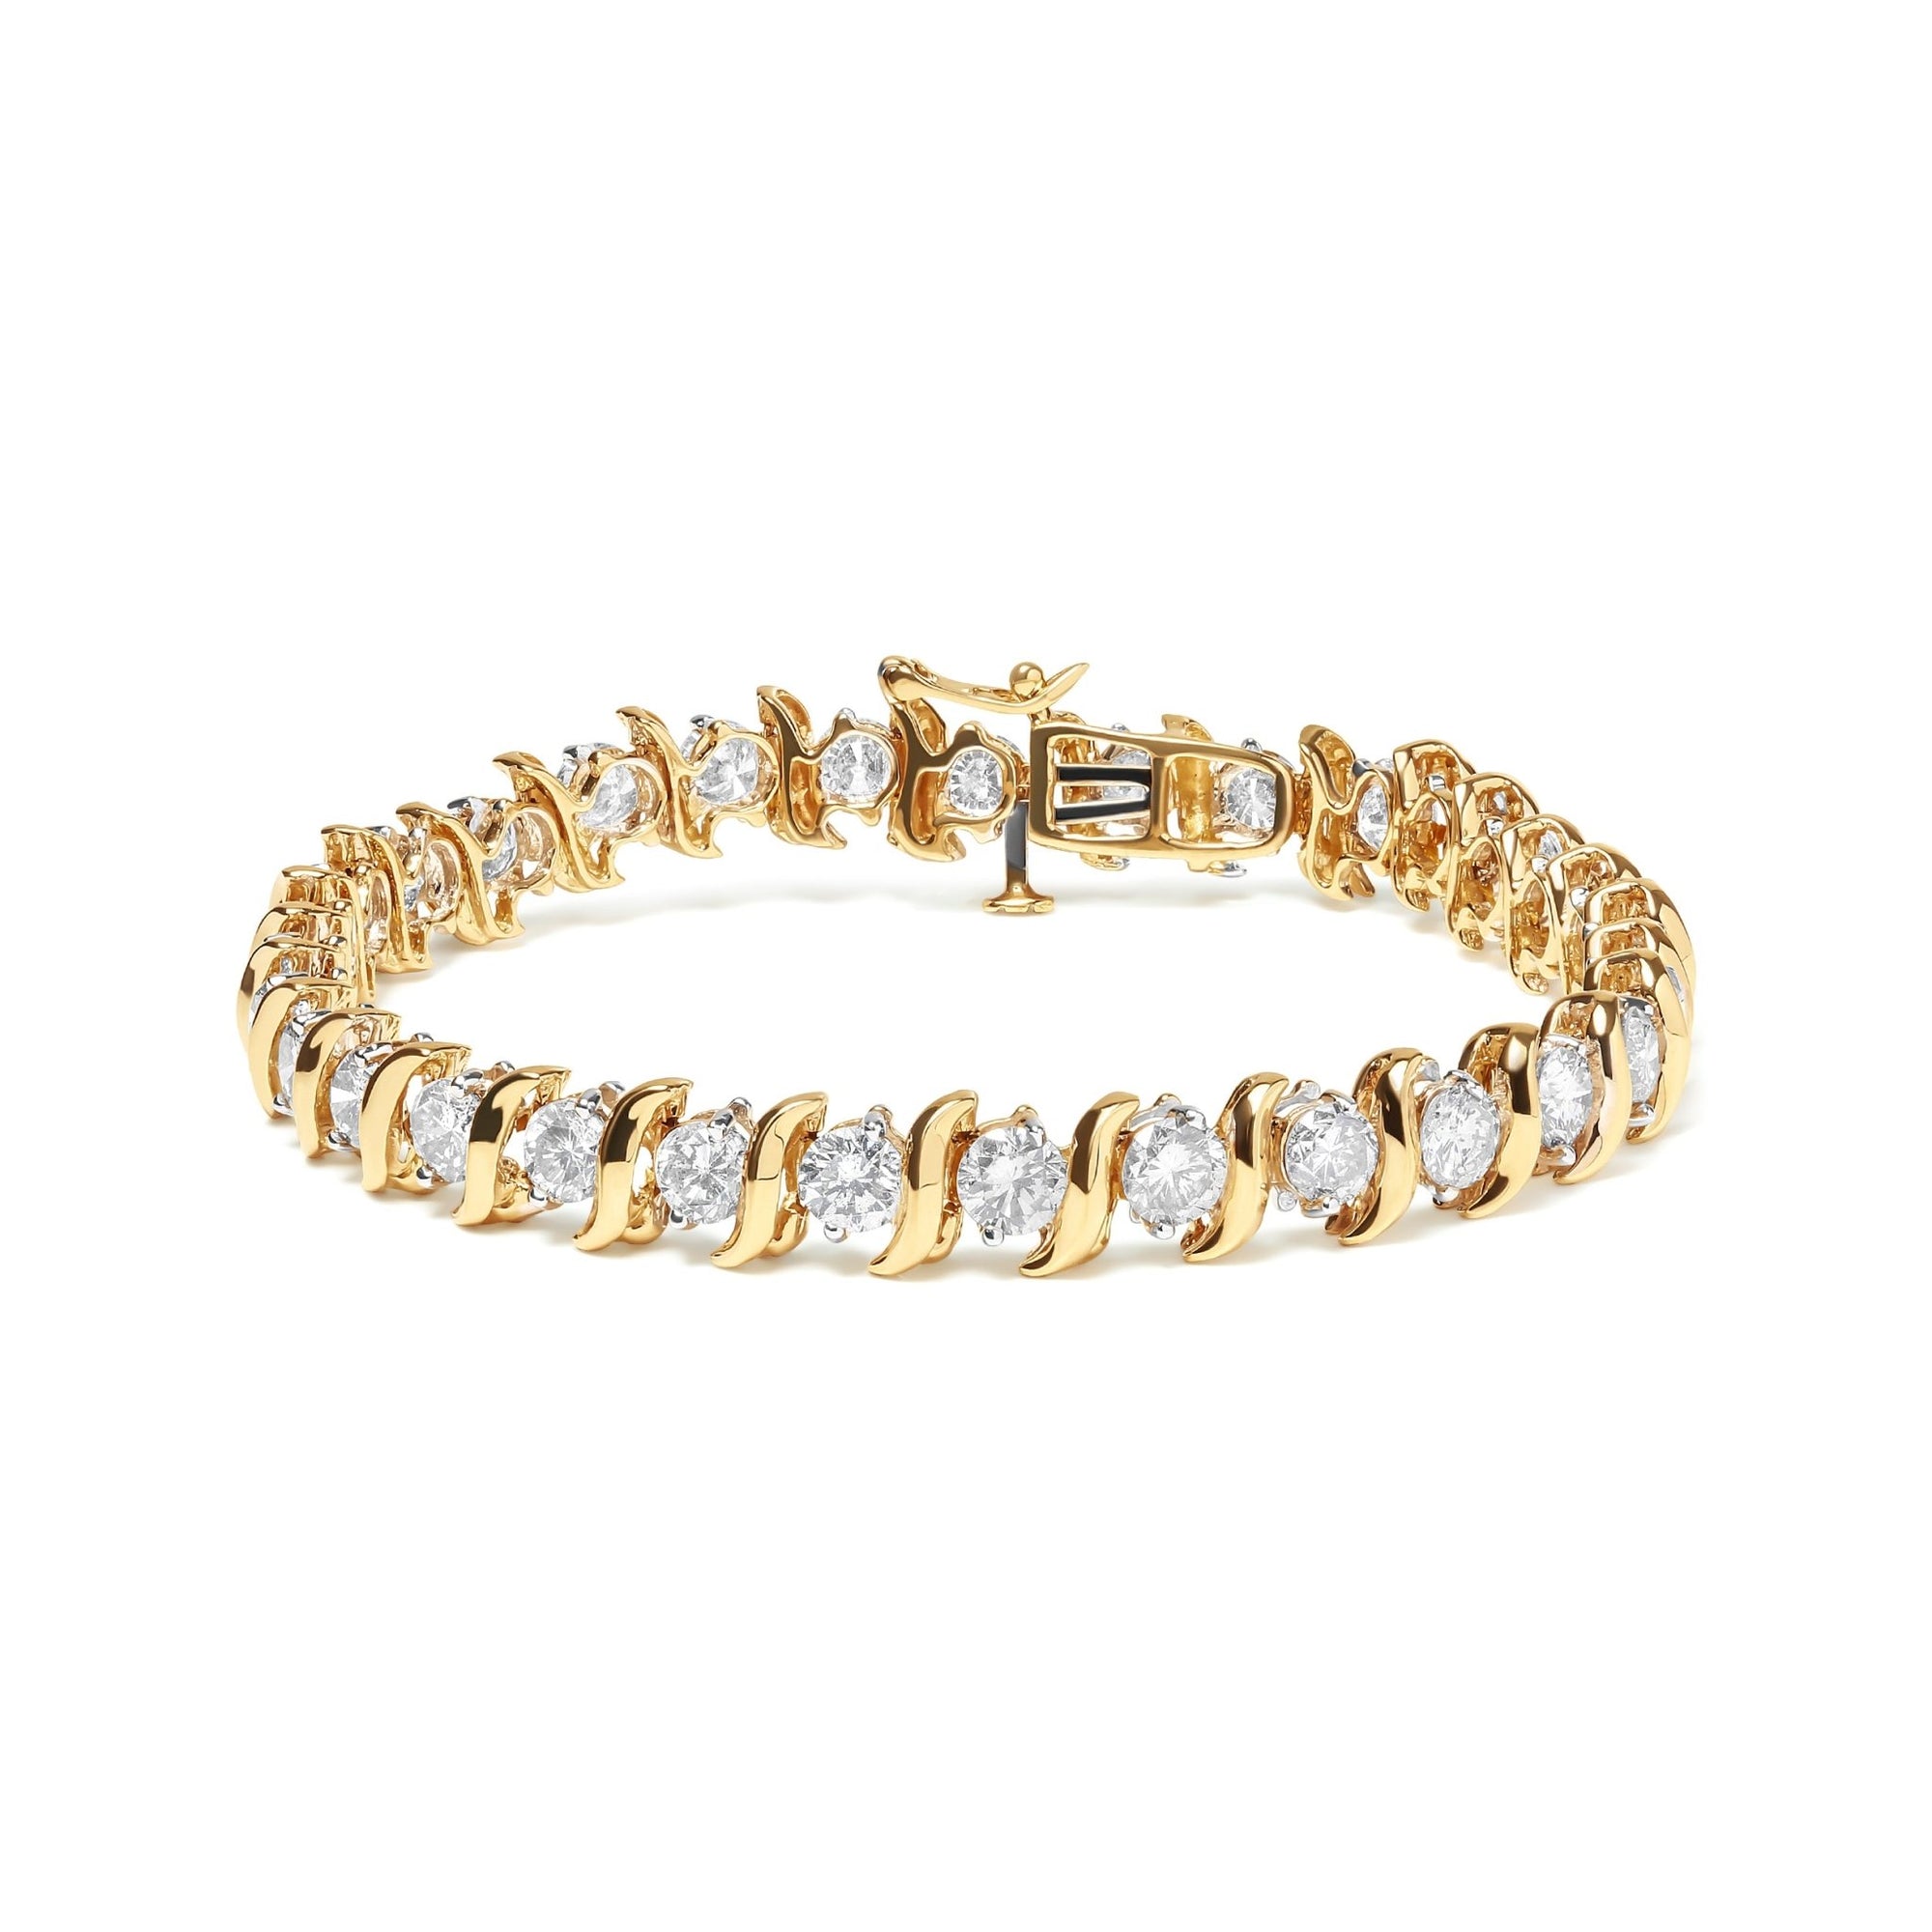 14K Yellow Gold 10.0 Cttw 2-Prong Set Round Cut Diamond S-Link Bracelet (J-K Color, SI2-I1 Clarity) -7.5" Inches - LinkagejewelrydesignLinkagejewelrydesign